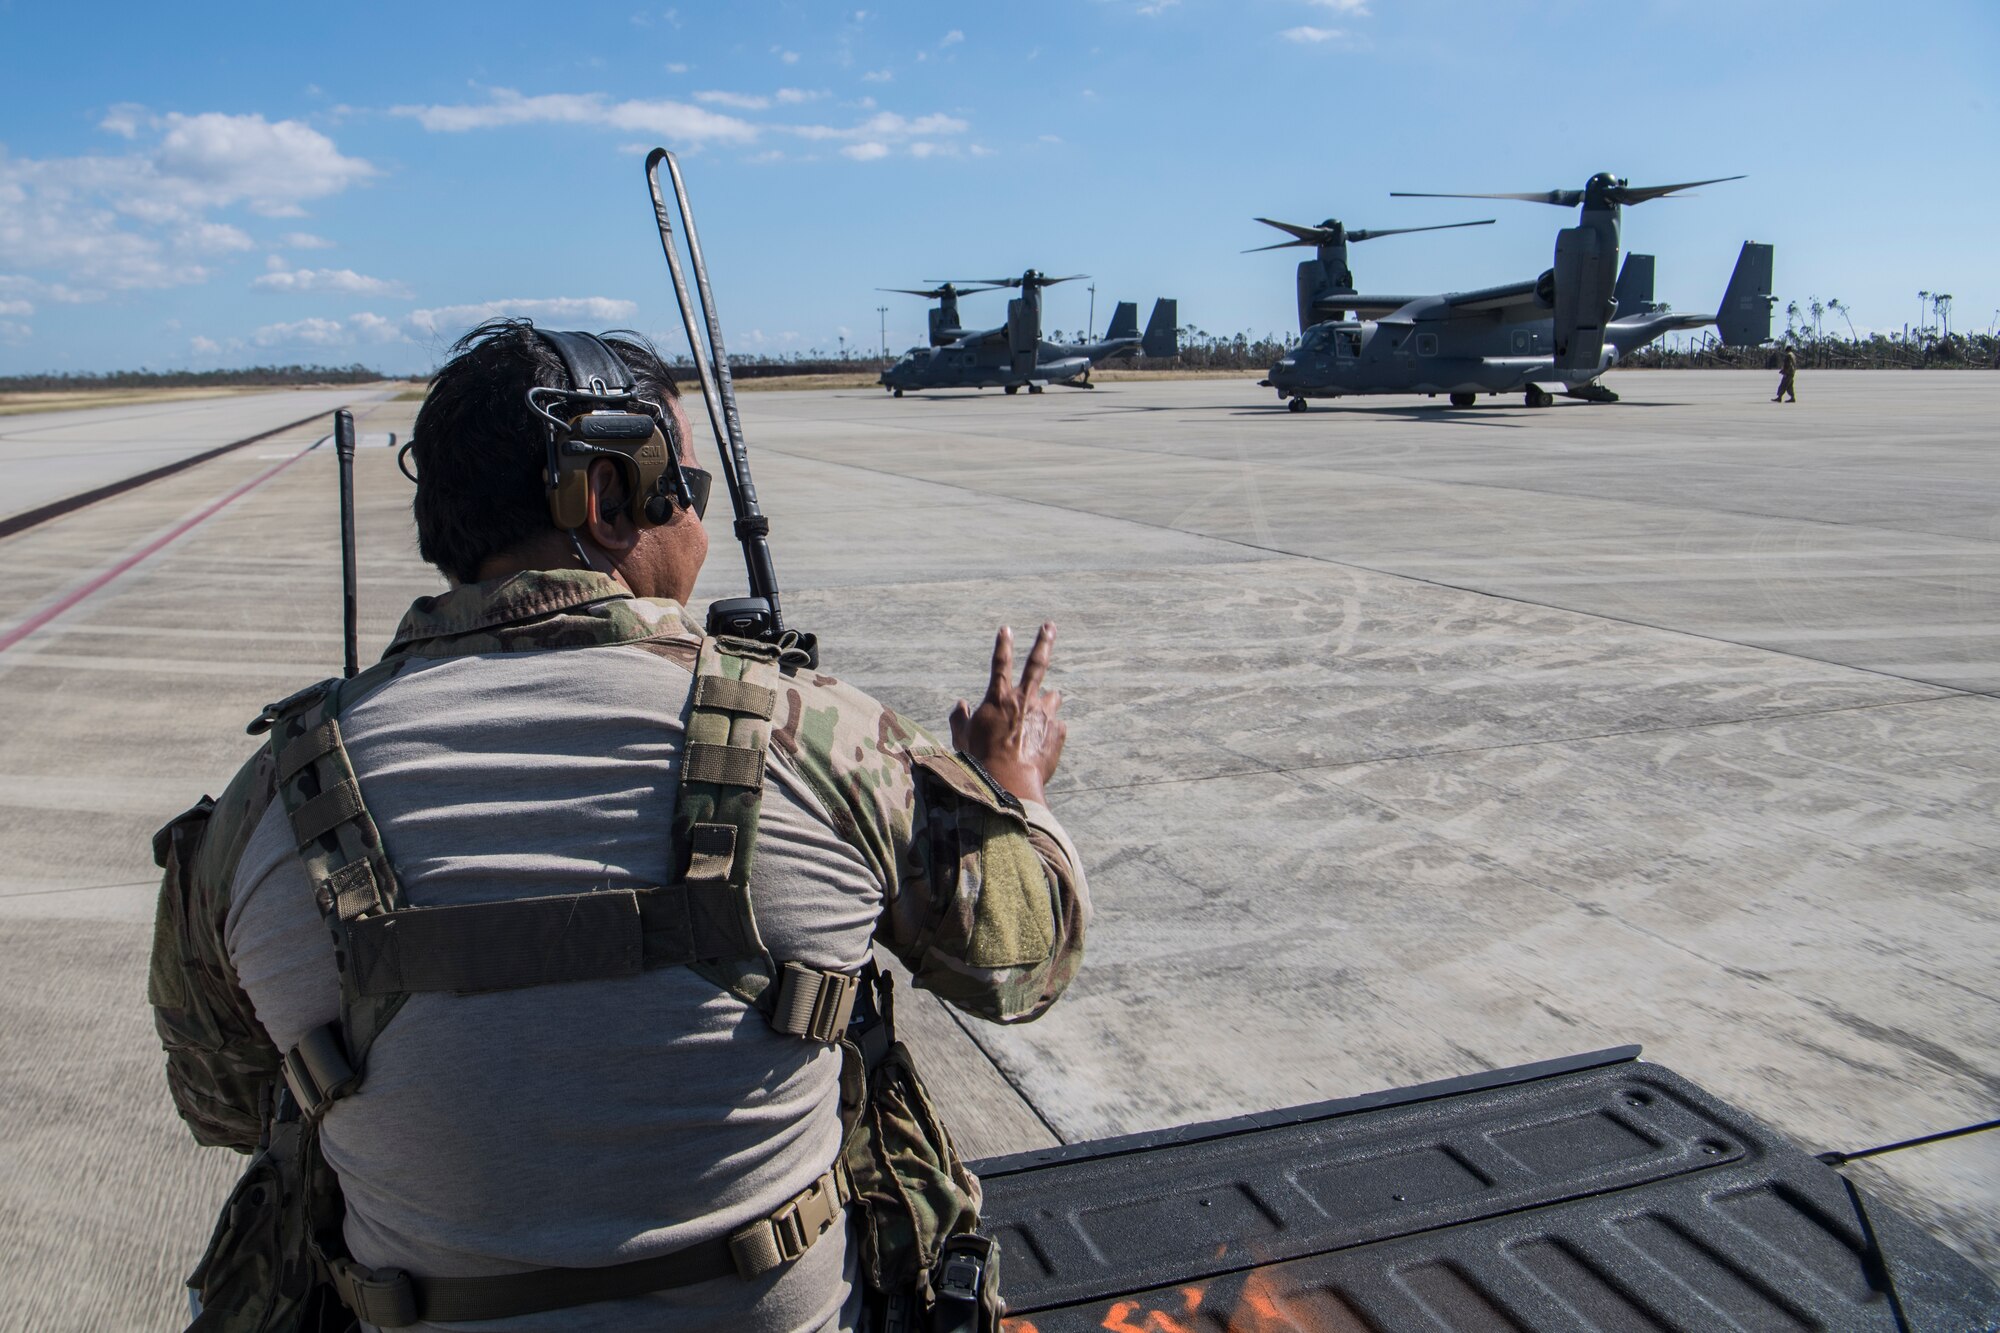 A Special Tactics Airman with the 23rd Special Tactics Squadron waves to a CV-22 Osprey tiltrotor aircraft assigned to the 8th Special Operations Squadron at Tyndall Air Force Base, Florida, Oct. 14, 2018.